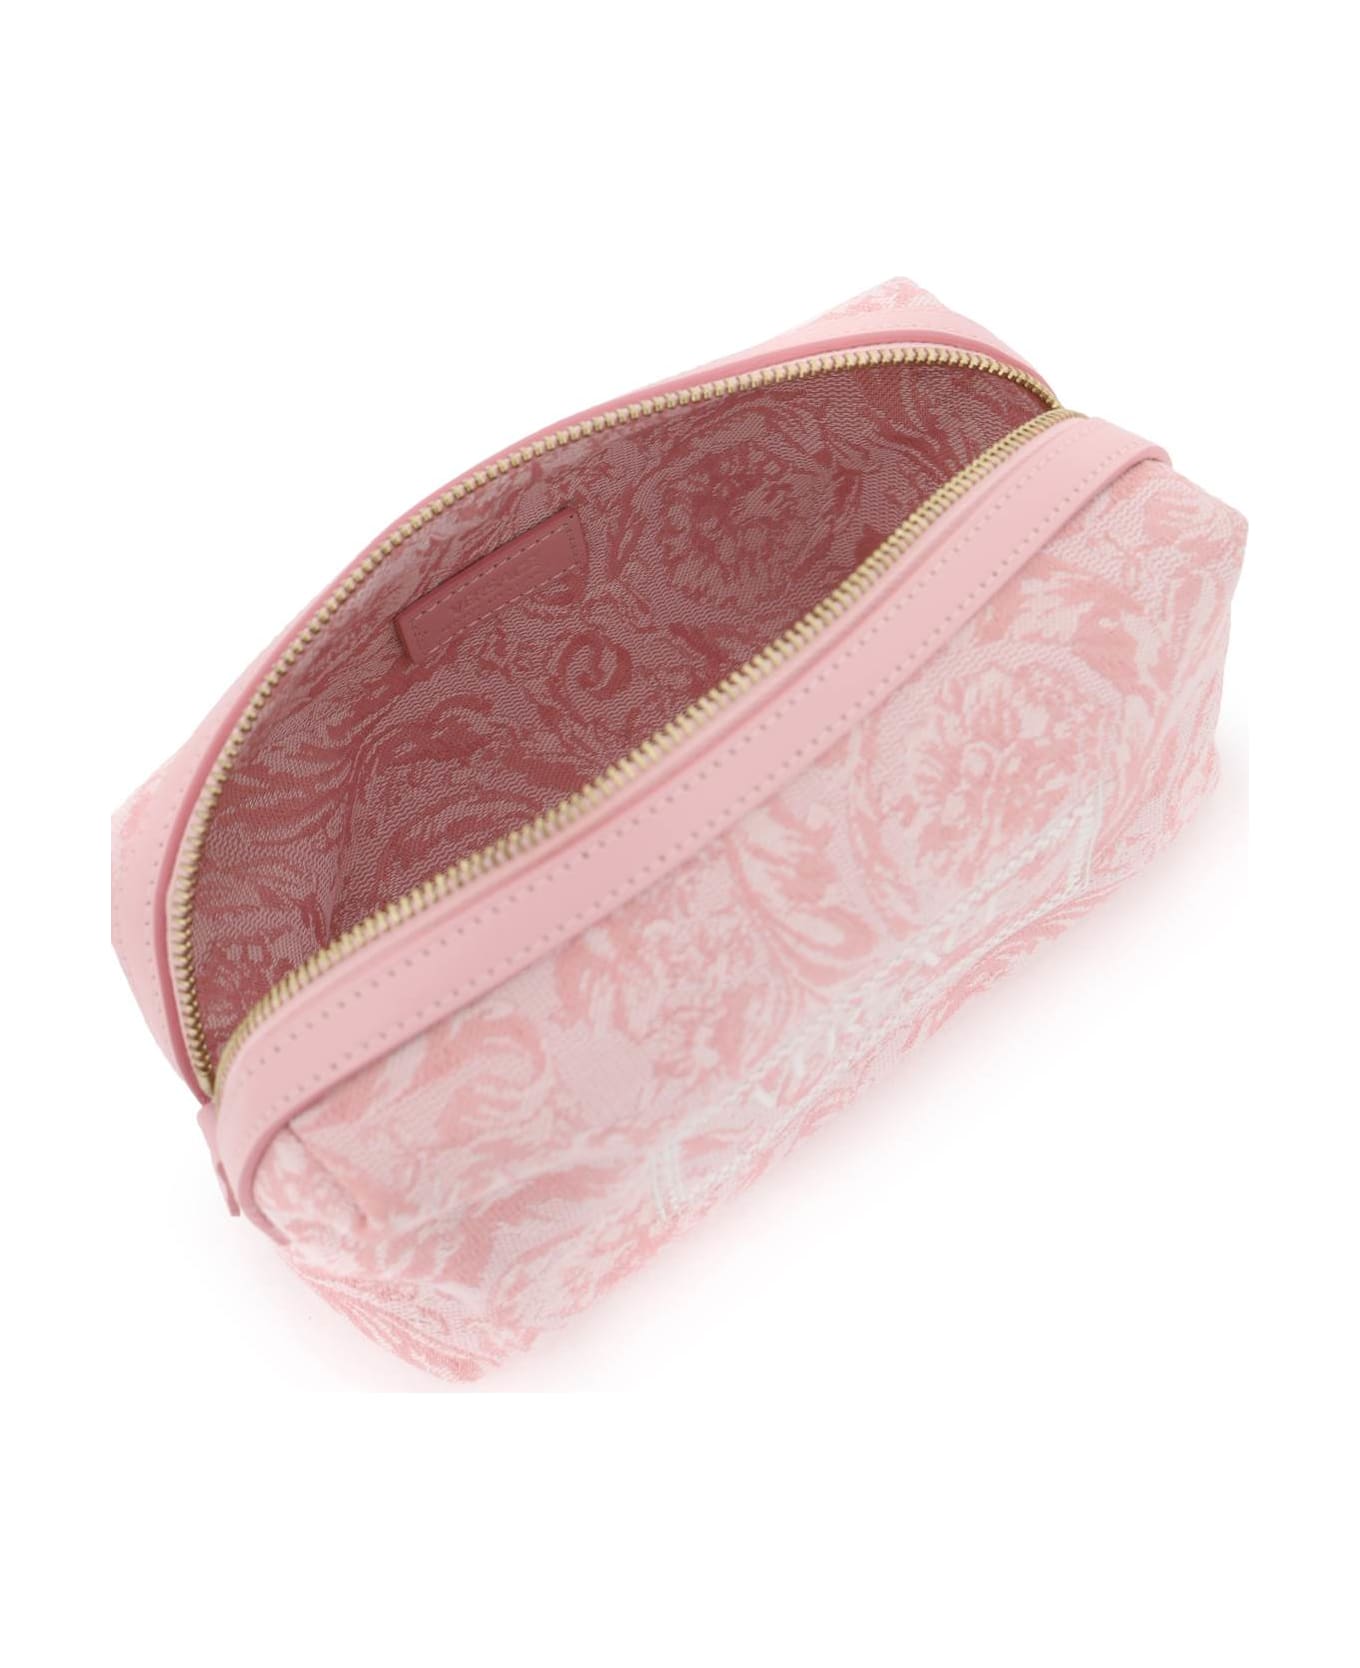 Versace Logo-embroidered Jacquard Zip-up Toiletry Bag - PALE PINK ENGLISH ROSE VE (Pink) クラッチバッグ